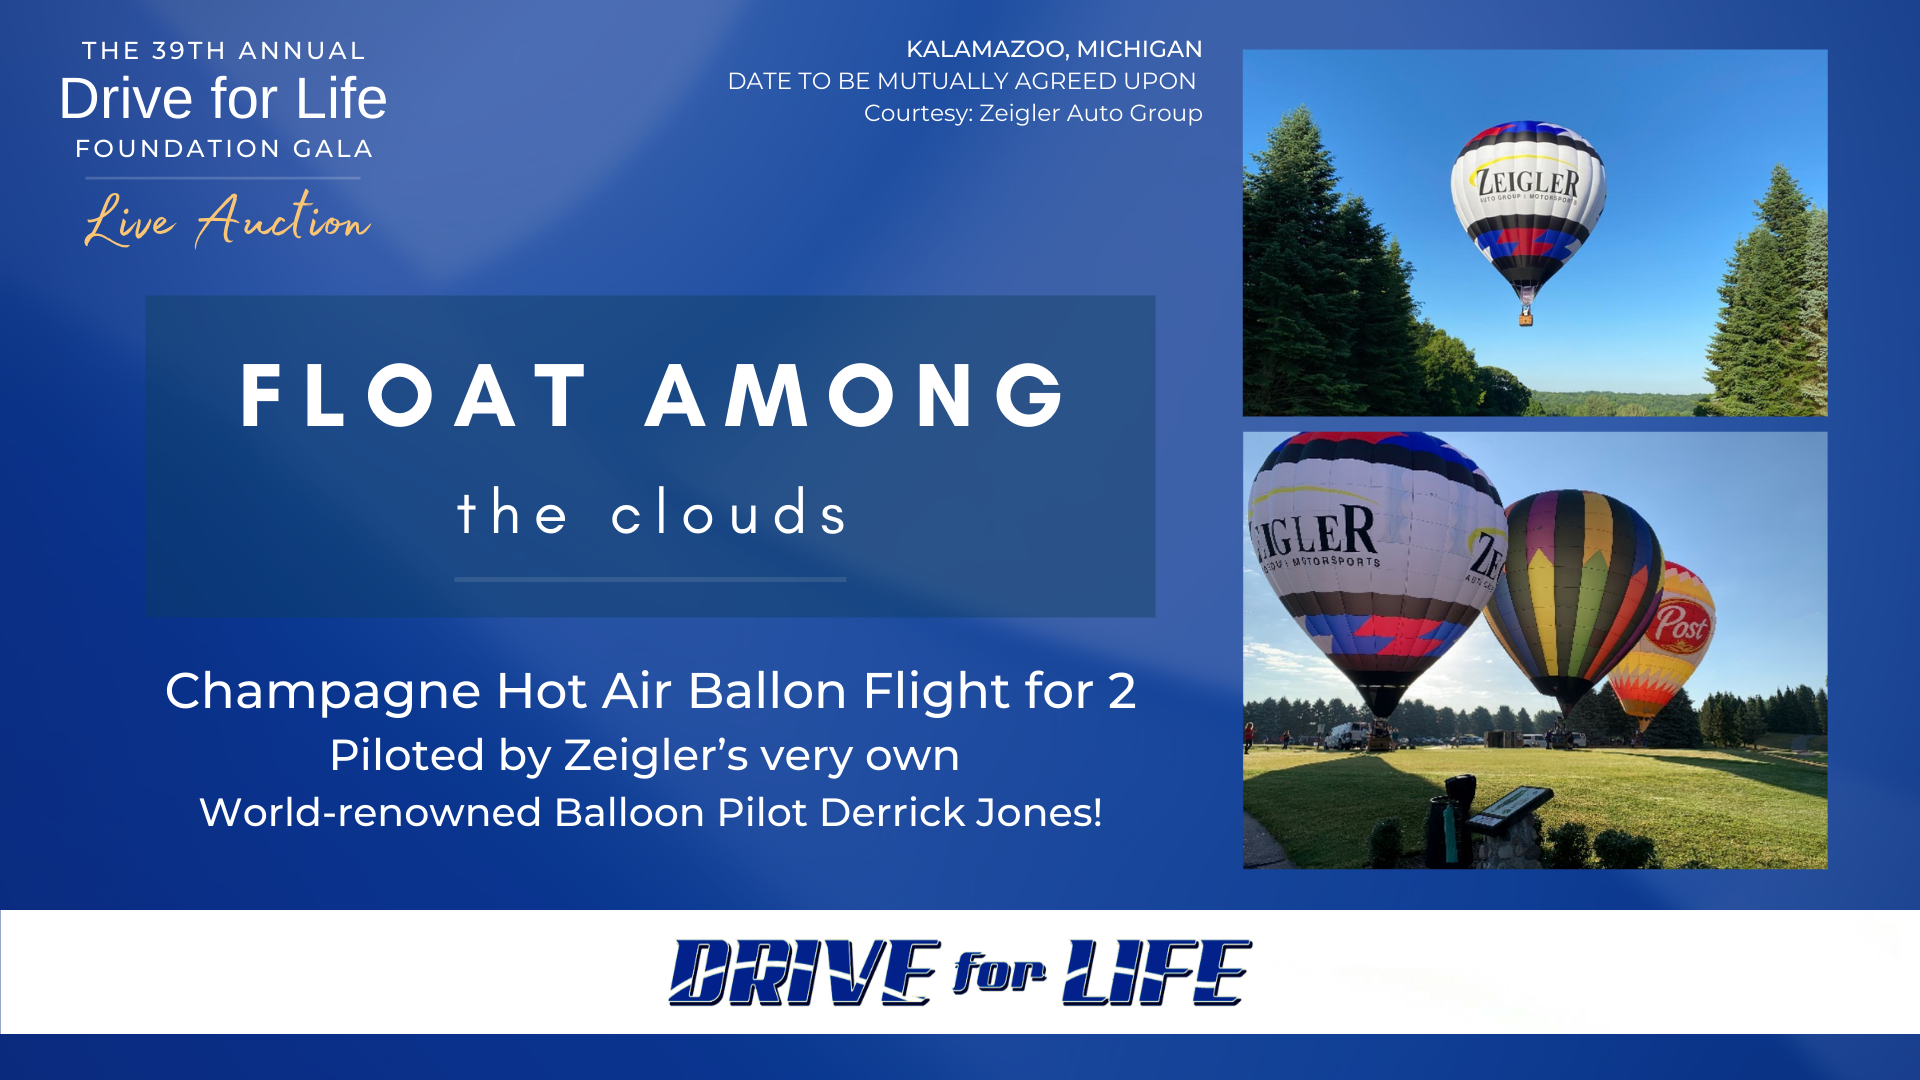 LIVE AUCTION EXPERIENCE: Float Among the Clouds - Available at the 39th Annual Drive for Life Foundation Monday, September 13, 2021 at 6:30 p.m. at the Radisson Plaza Hotel in Kalamazoo, Mich.